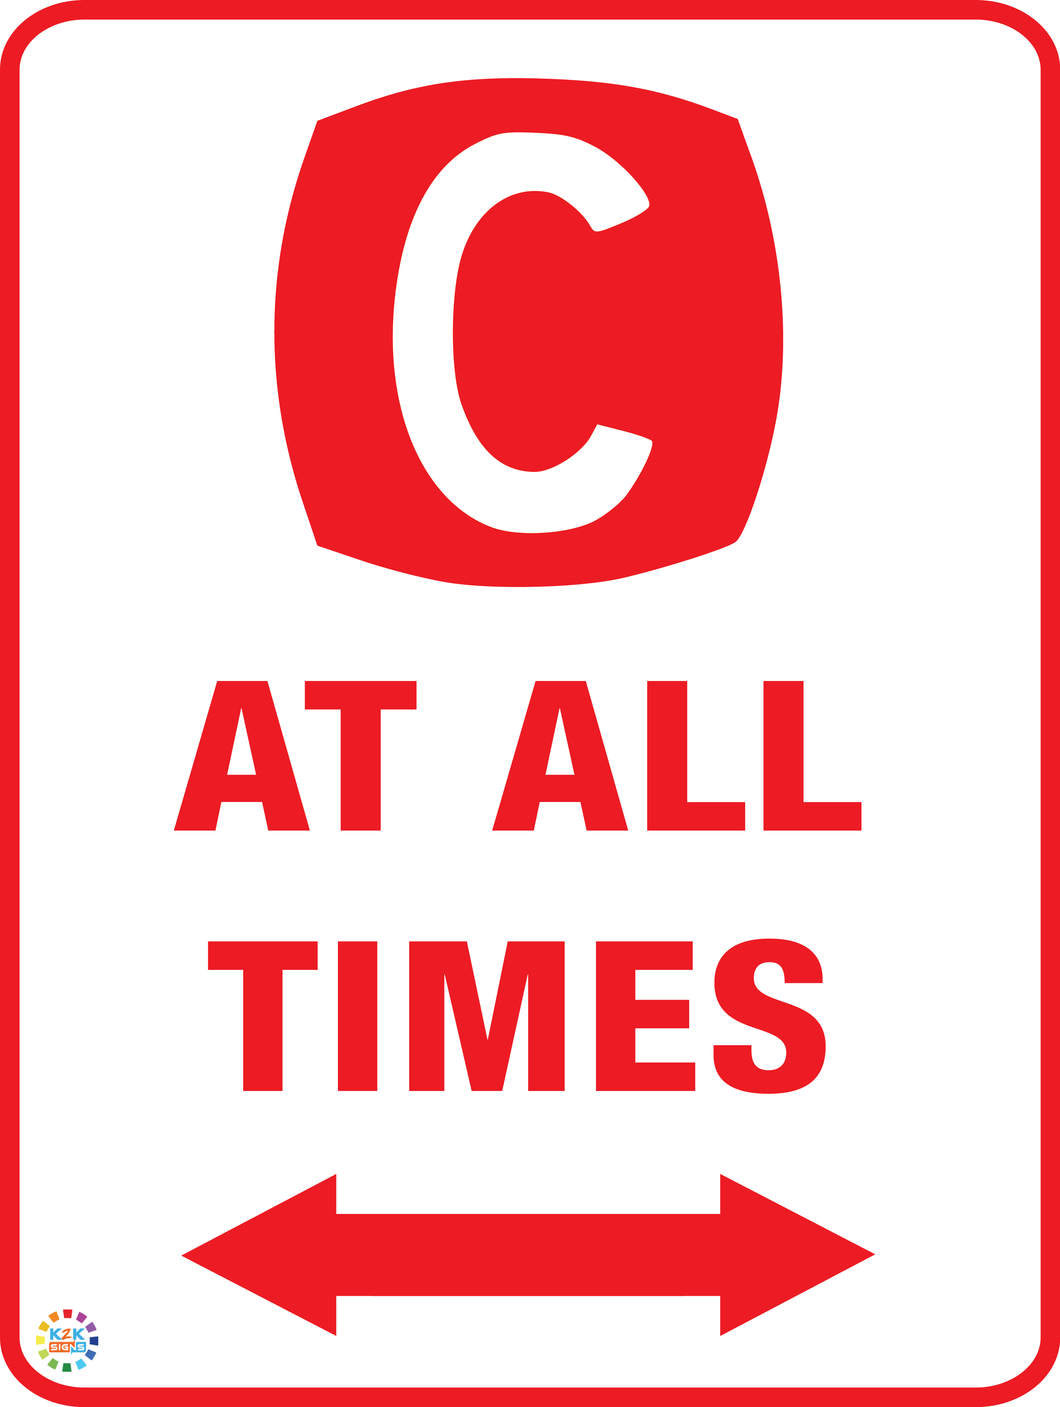 Clearway At All Times - Two Way Arrow Sign